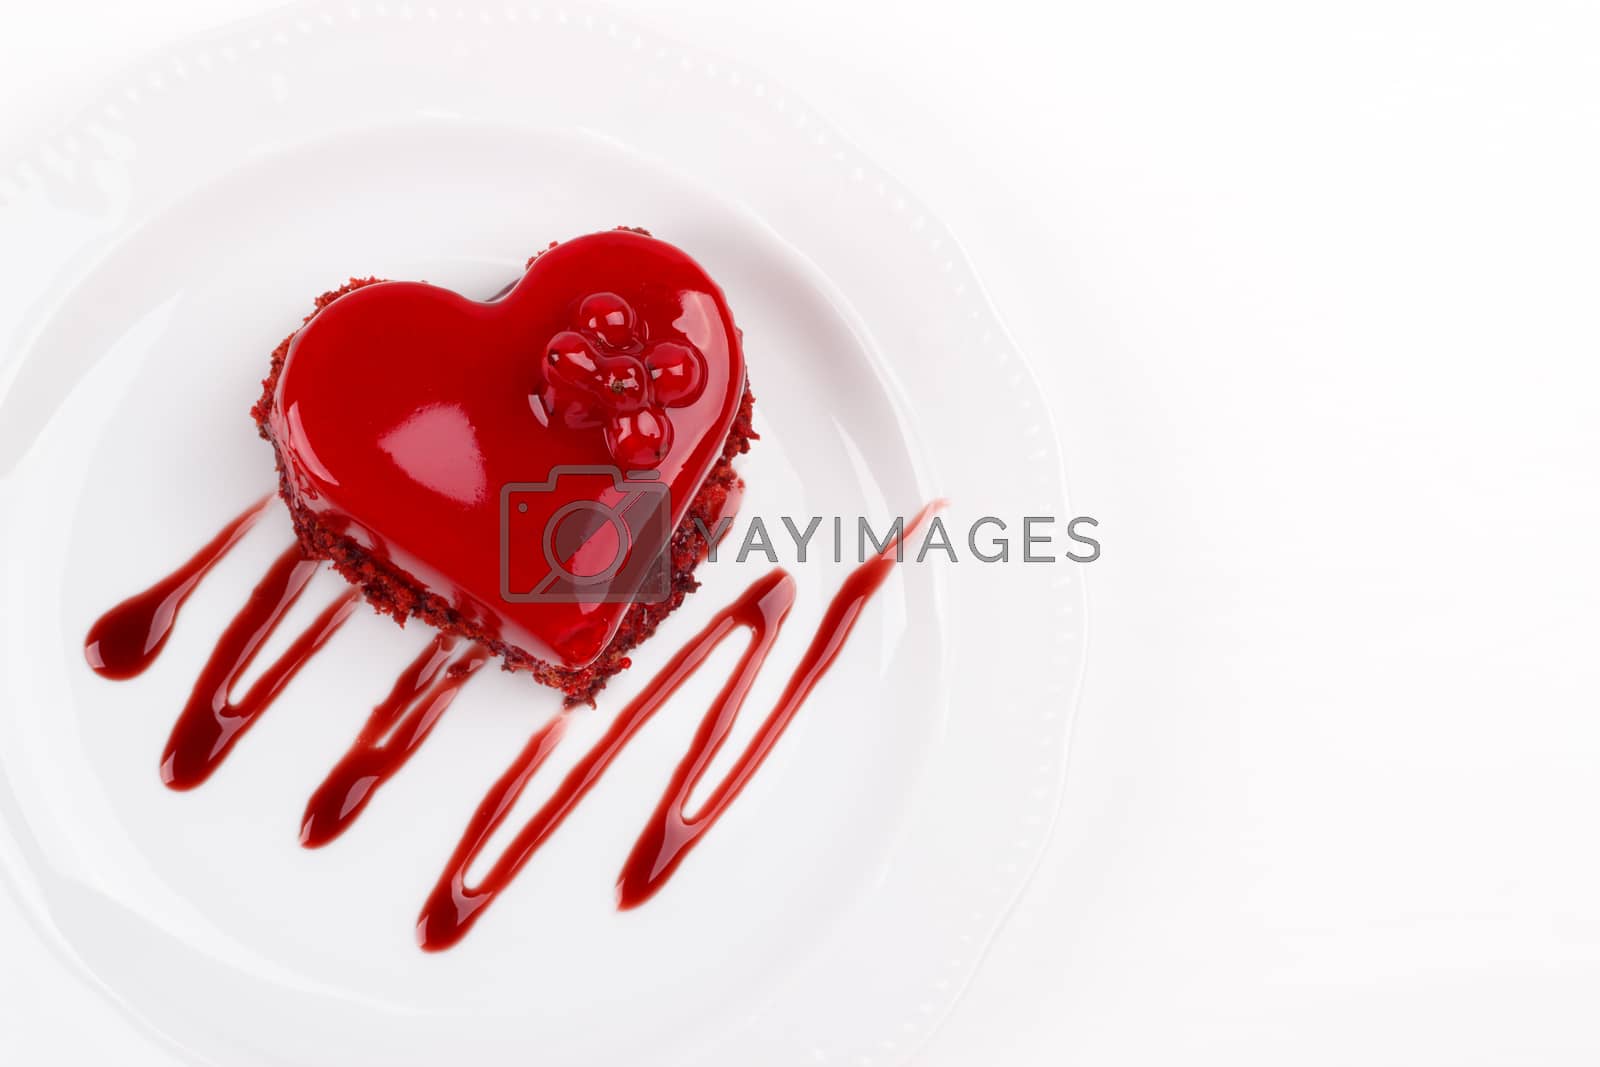 Royalty free image of Heart shaped cake by Lana_M